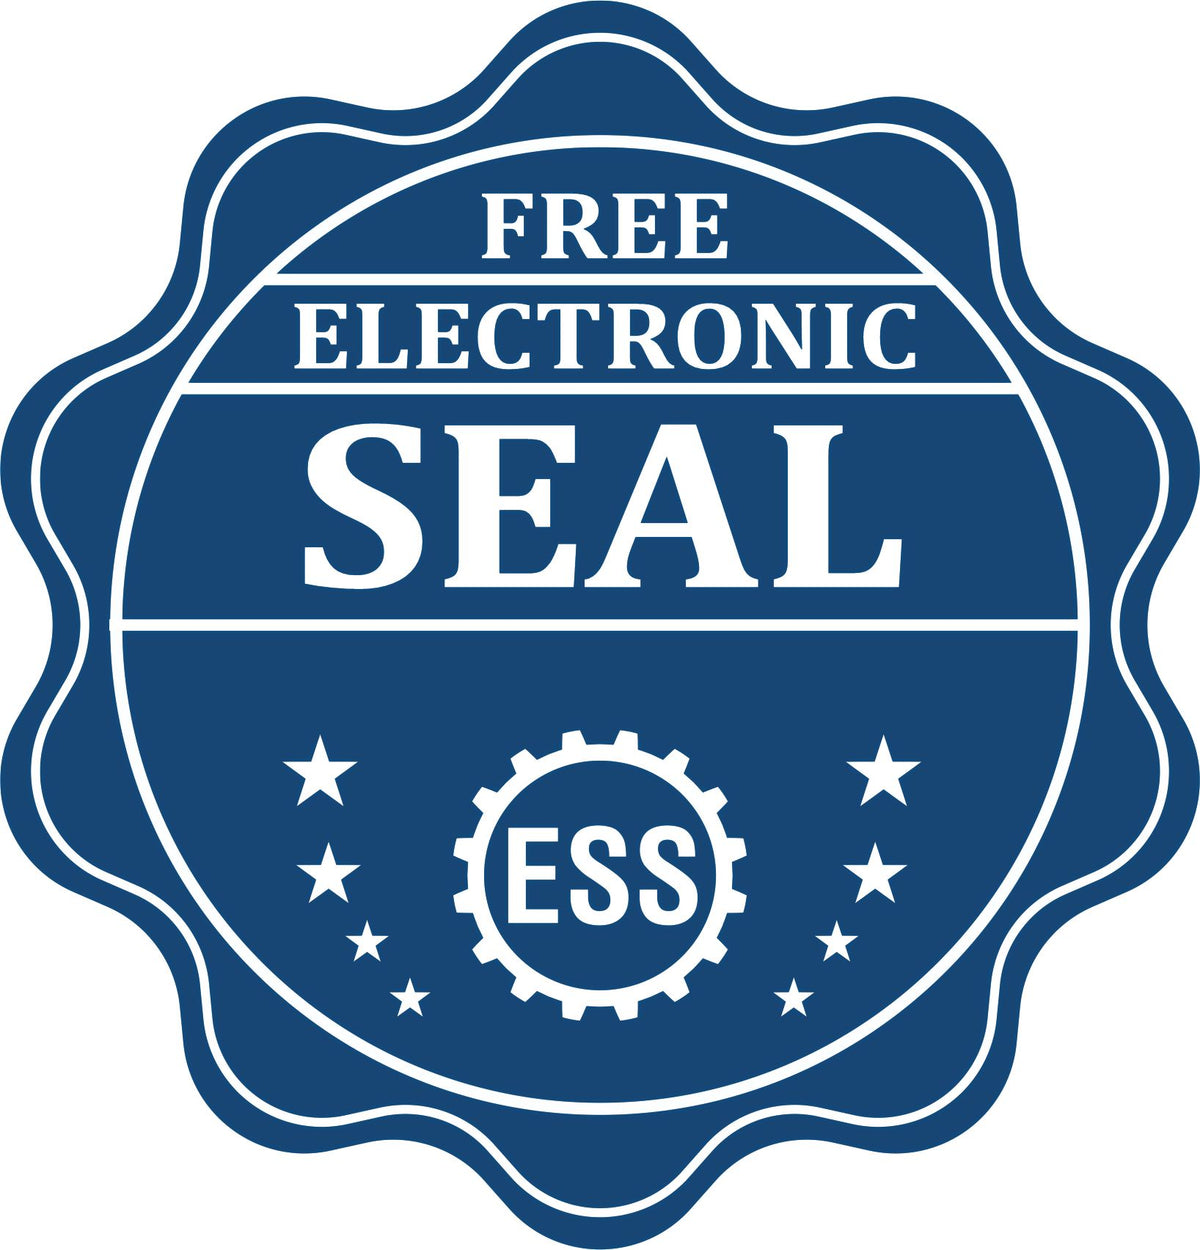 A badge showing a free electronic seal for the MaxLight Premium Pre-Inked Kansas State Seal Notarial Stamp with stars and the ESS gear on the emblem.